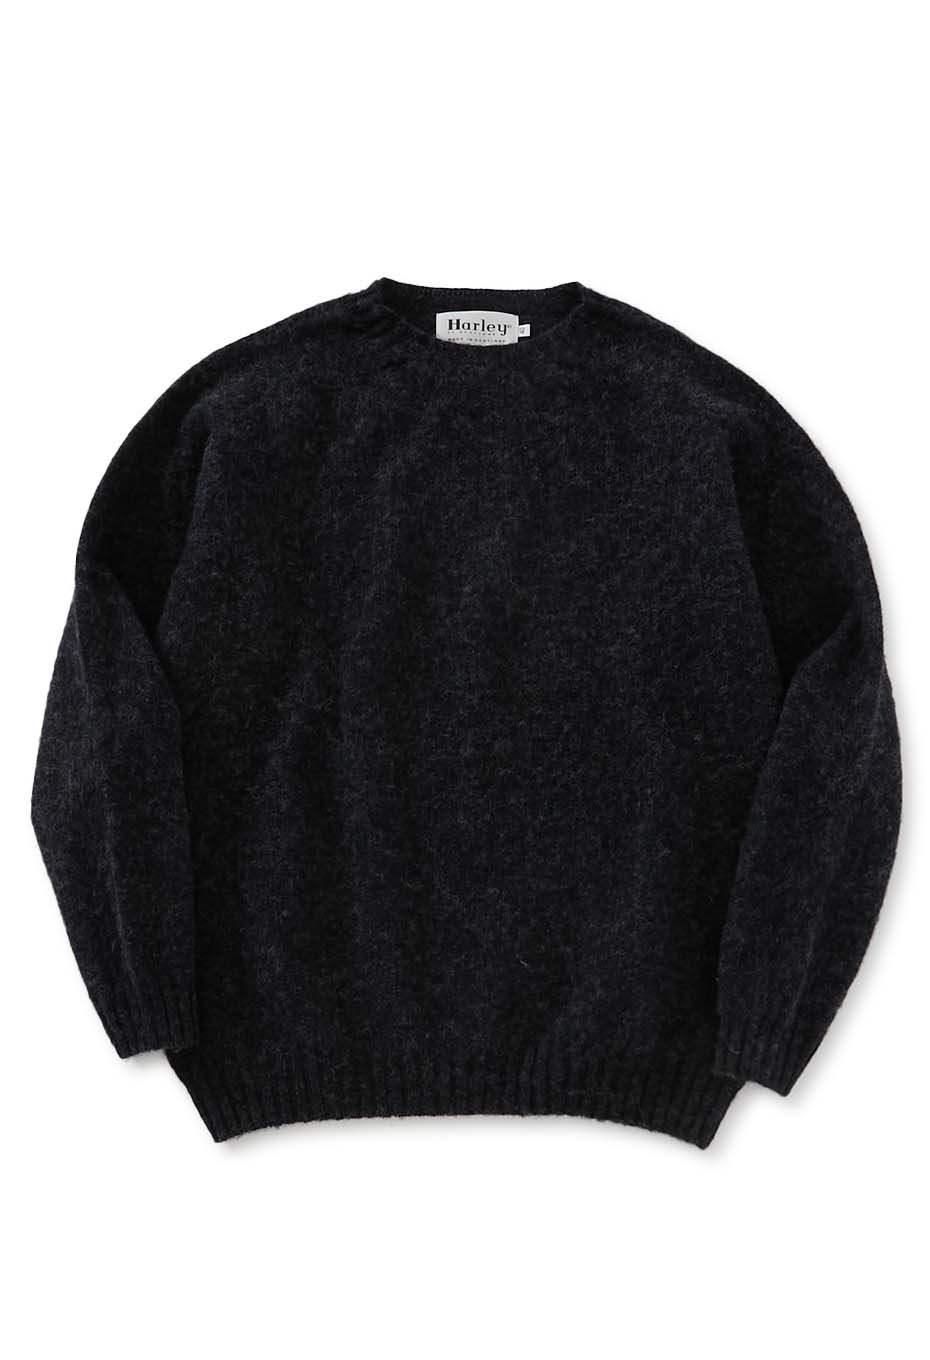 Harley Shaggy Brushed Super Soft fit crew neck Sweater